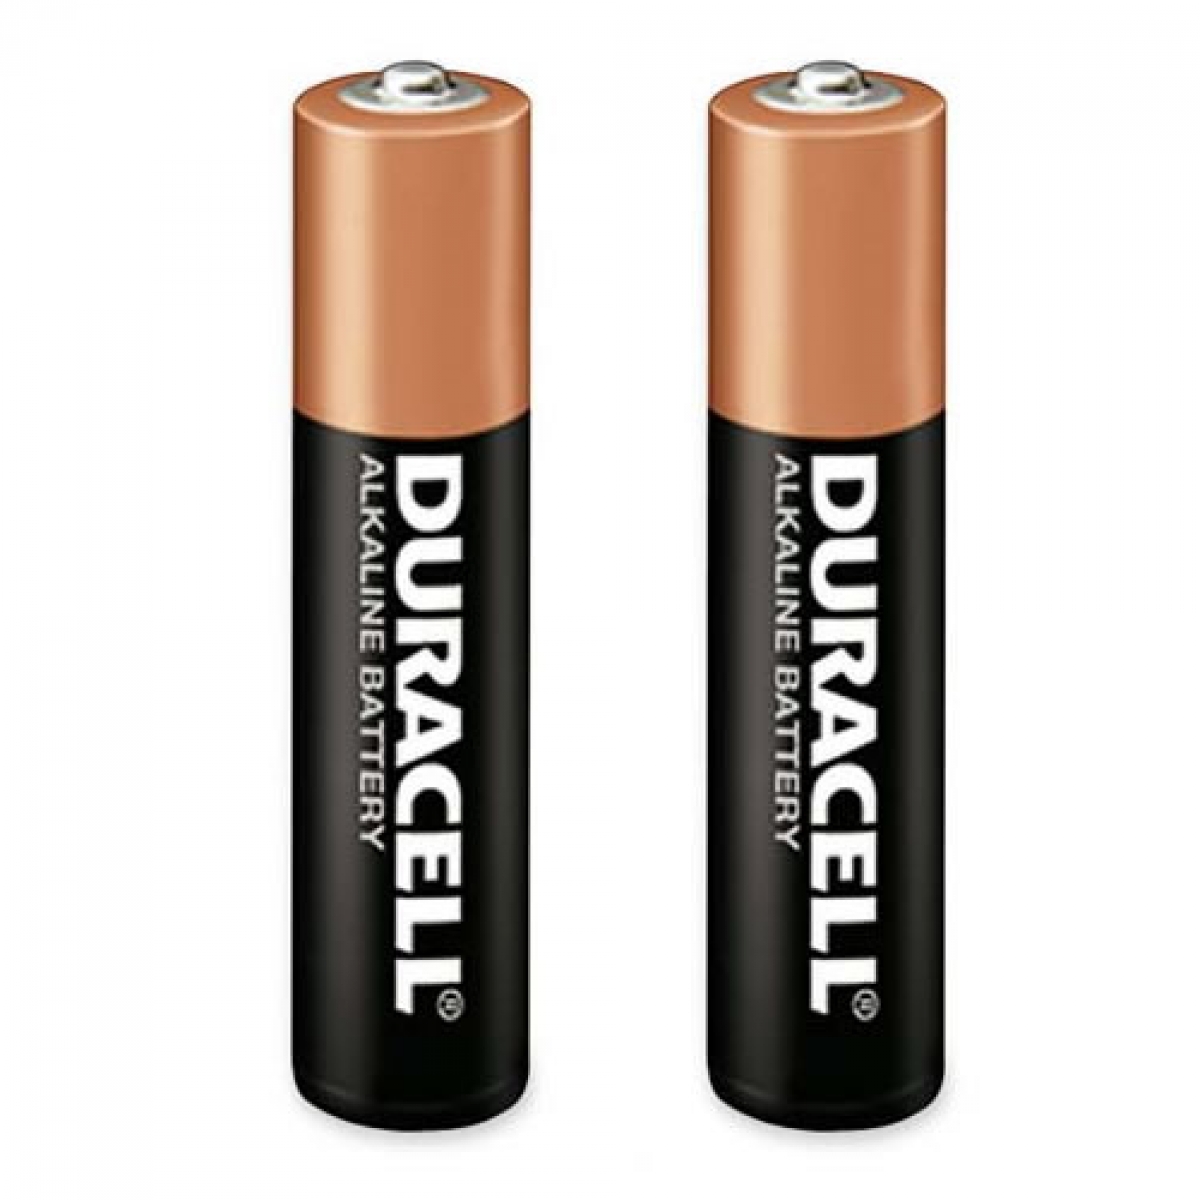 new-trident-duracell-printable-coupons-http-www-iheartcoupons